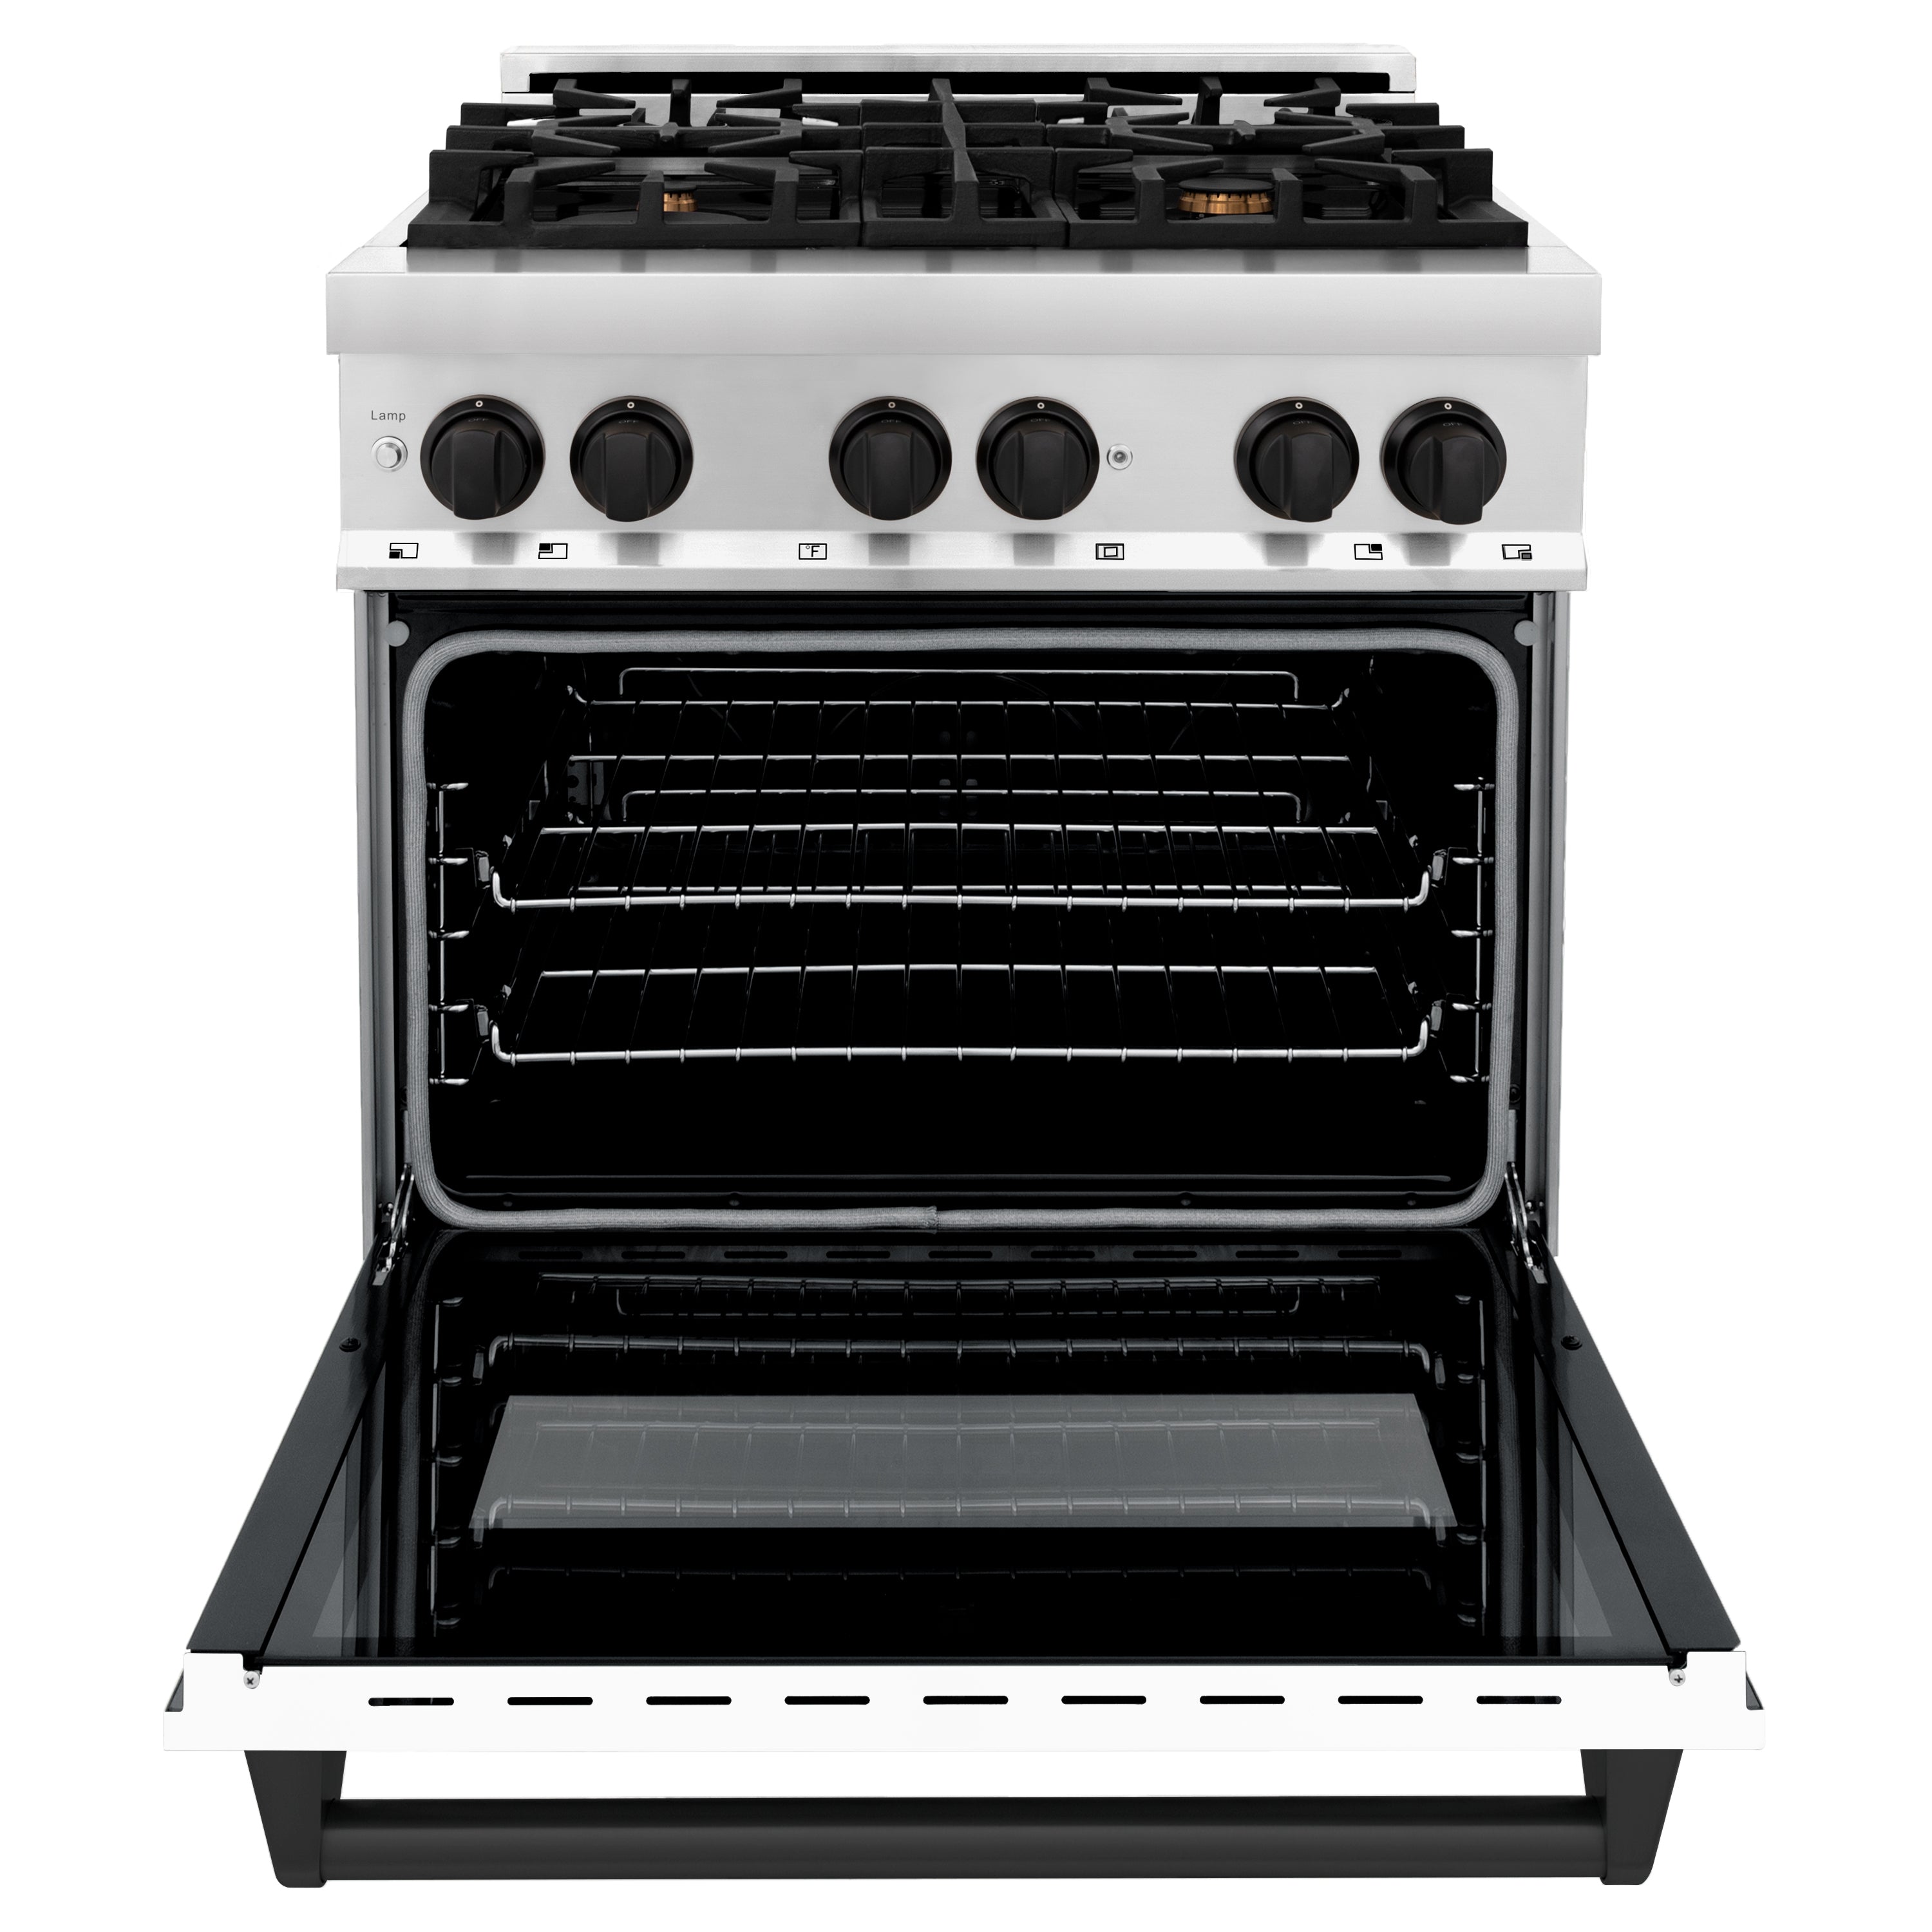 ZLINE 30" 4.0 cu. ft. Dual Fuel Range with Gas Stove and Electric Oven in Stainless Steel with White Matte Door and Accents (RAZ-WM-30-MB)